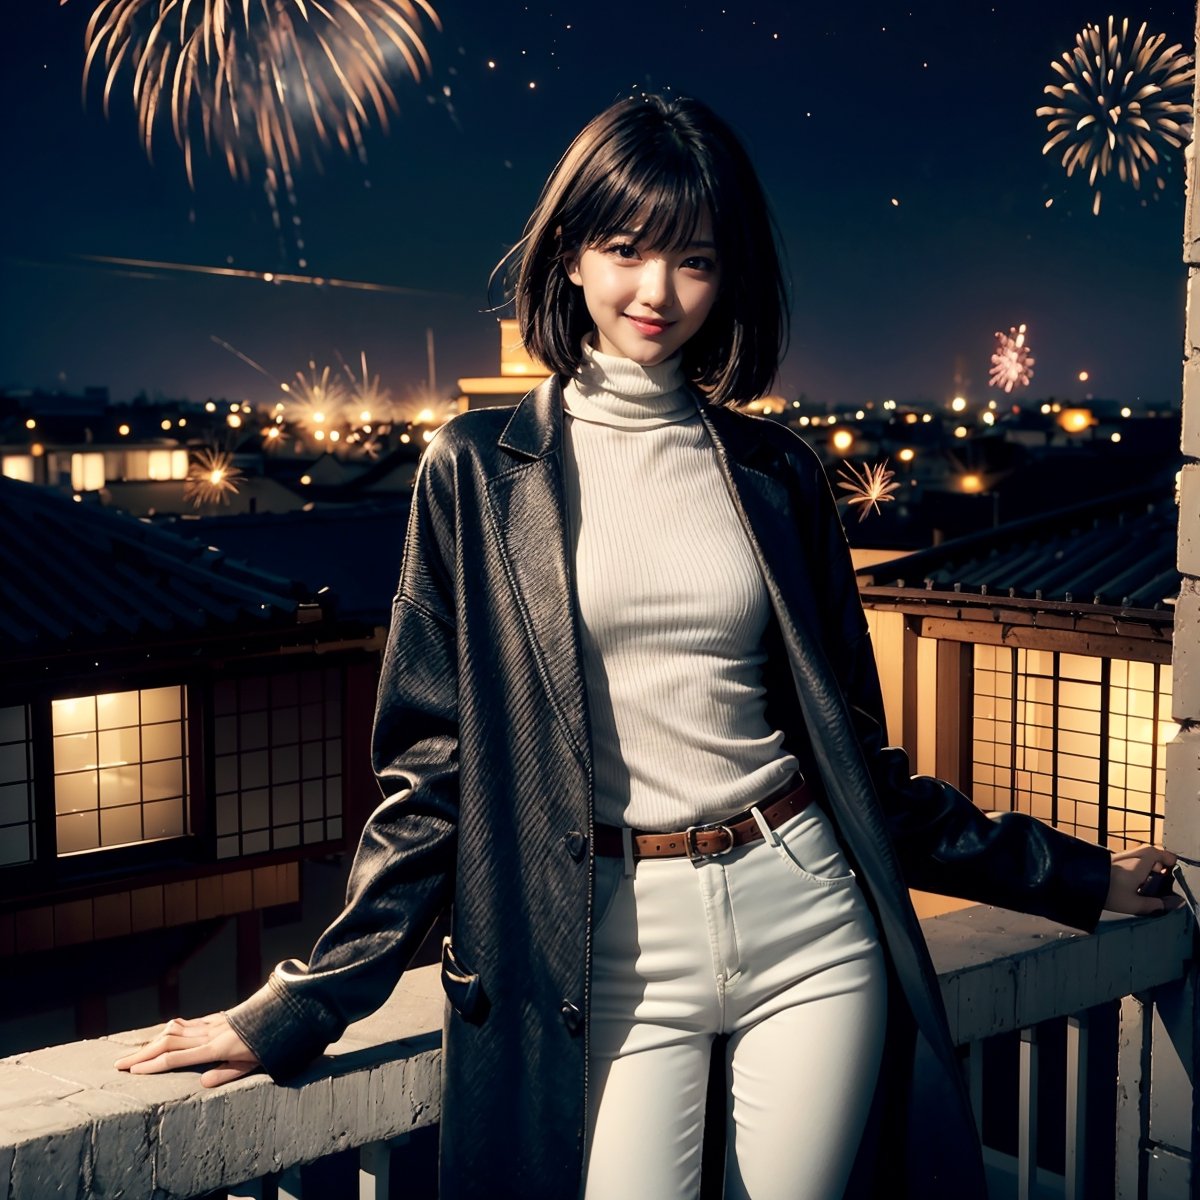 Fractal art that is mesmerizing and visually stunning. Official art, masterpiece. 4K high resolution rendering. One Japanese female, 17 years old, 5 feet tall. Straight, medium bob black hair, bangs, dark brown eyes, short eyelashes. Smiling face. Small breasts, nice legs. Building rooftop, iron fence, night, night view, starry sky, fireworks. Long warm wool coat, white turtleneck sweater, leather pants. Cowboy shot.,1 girl